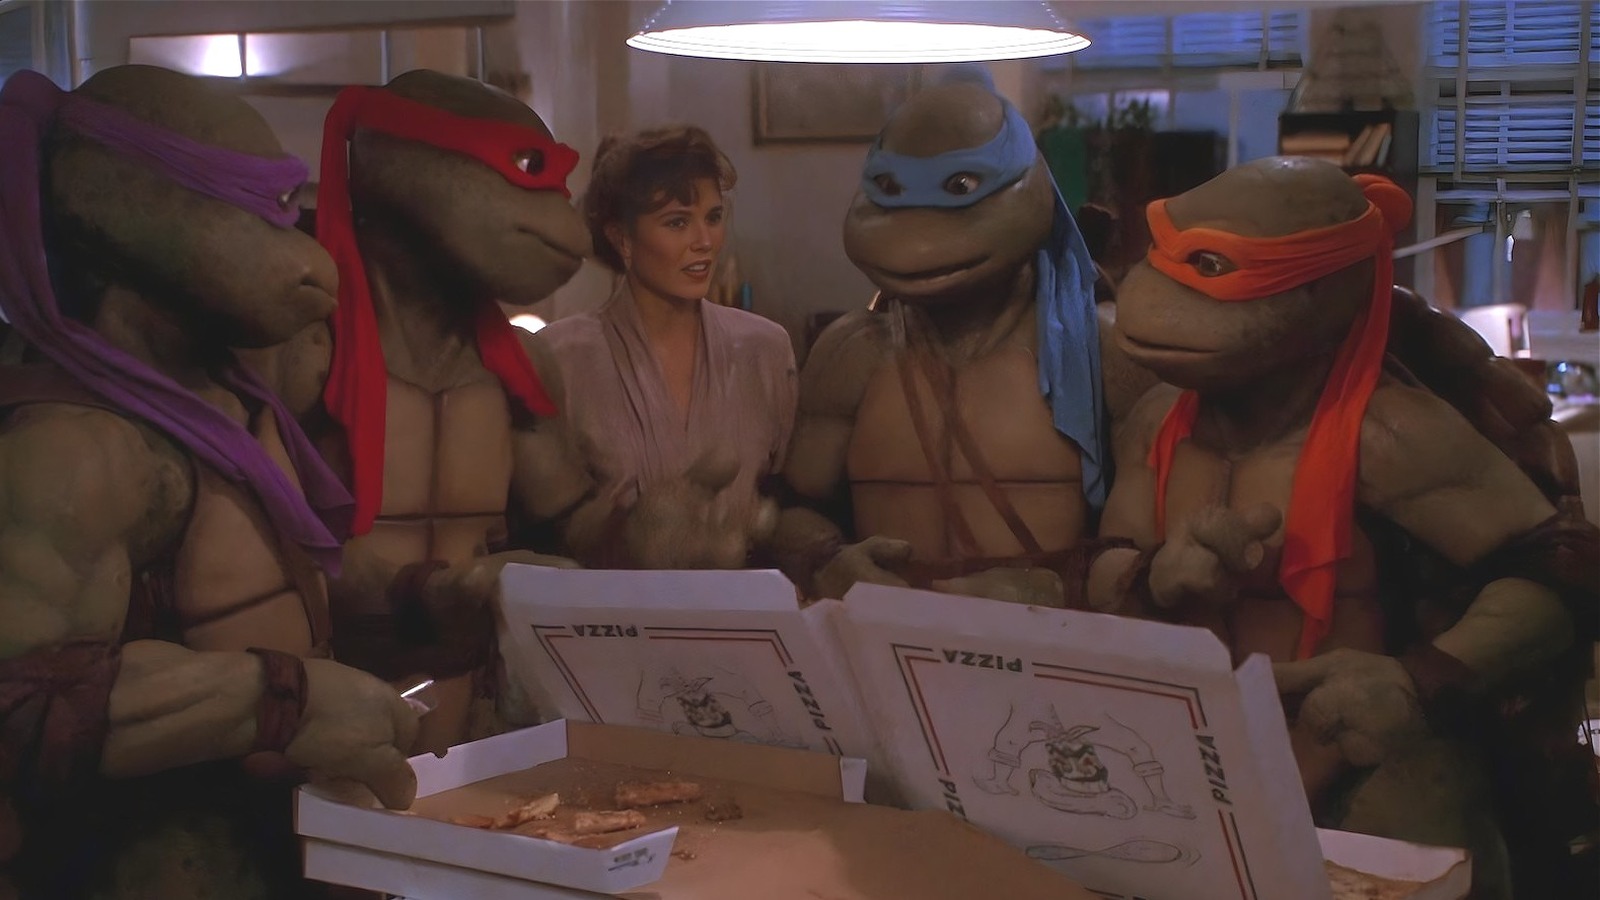 https://www.looper.com/img/gallery/why-was-teenage-mutant-ninja-turtles-4-canceled-and-what-was-it-about/l-intro-1688621281.jpg